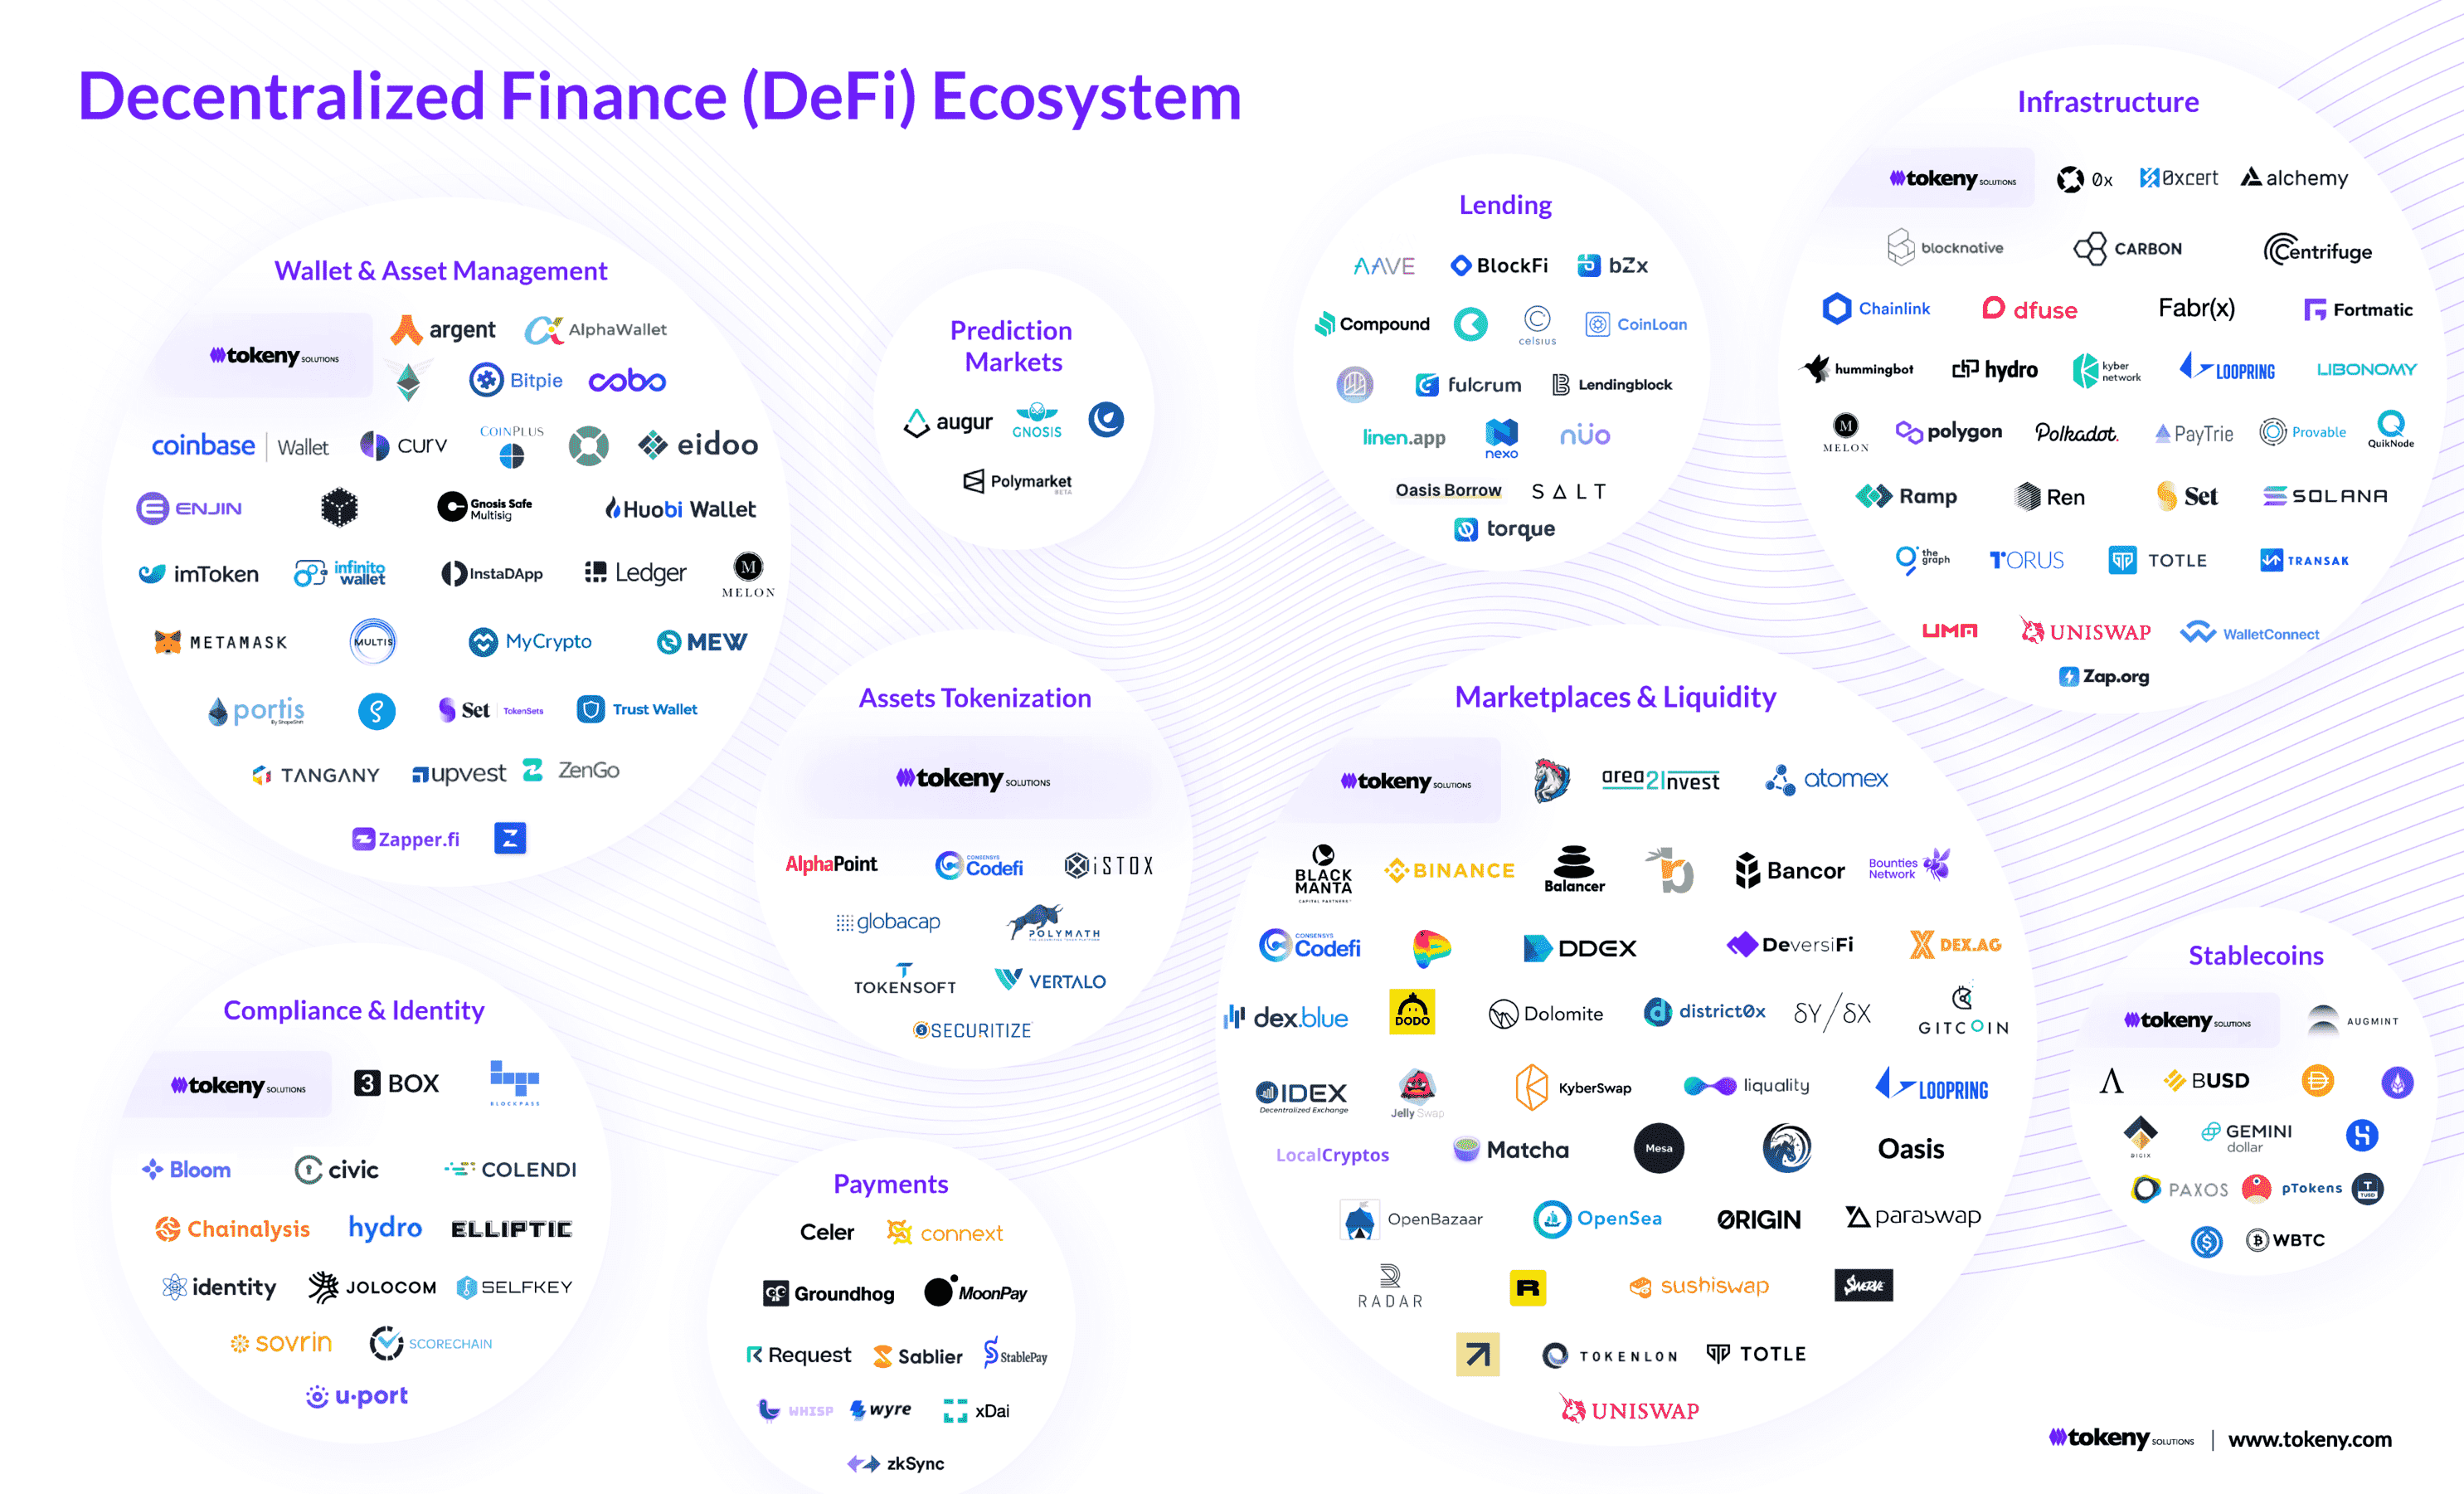 Map of the DeFi ecosystem